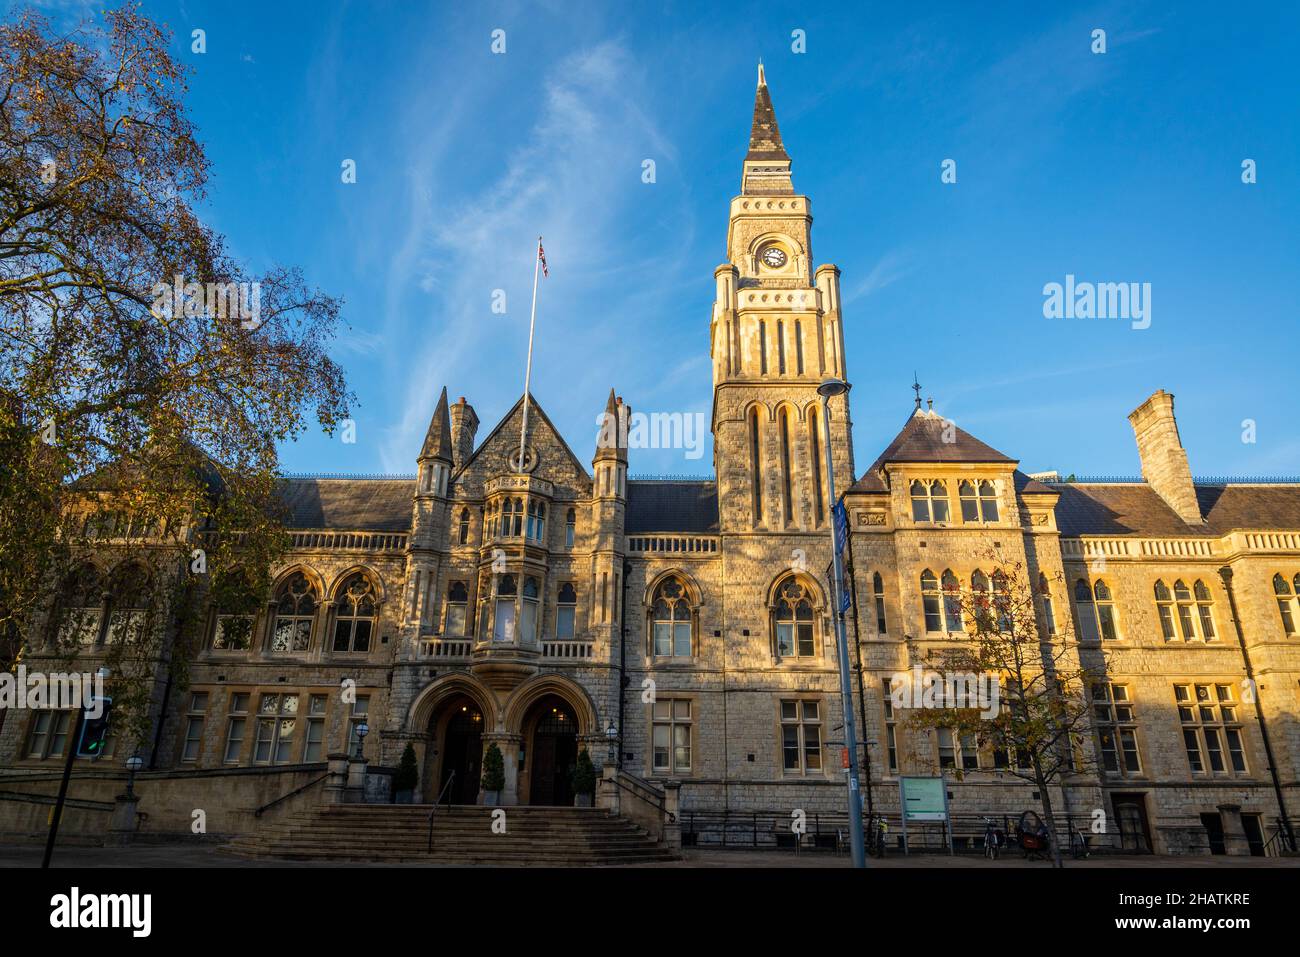 Ealing Town hall, a distinctive late-Victorian gothic building on Ealing Broadway, London borough of Ealing, London, England, UK Stock Photo